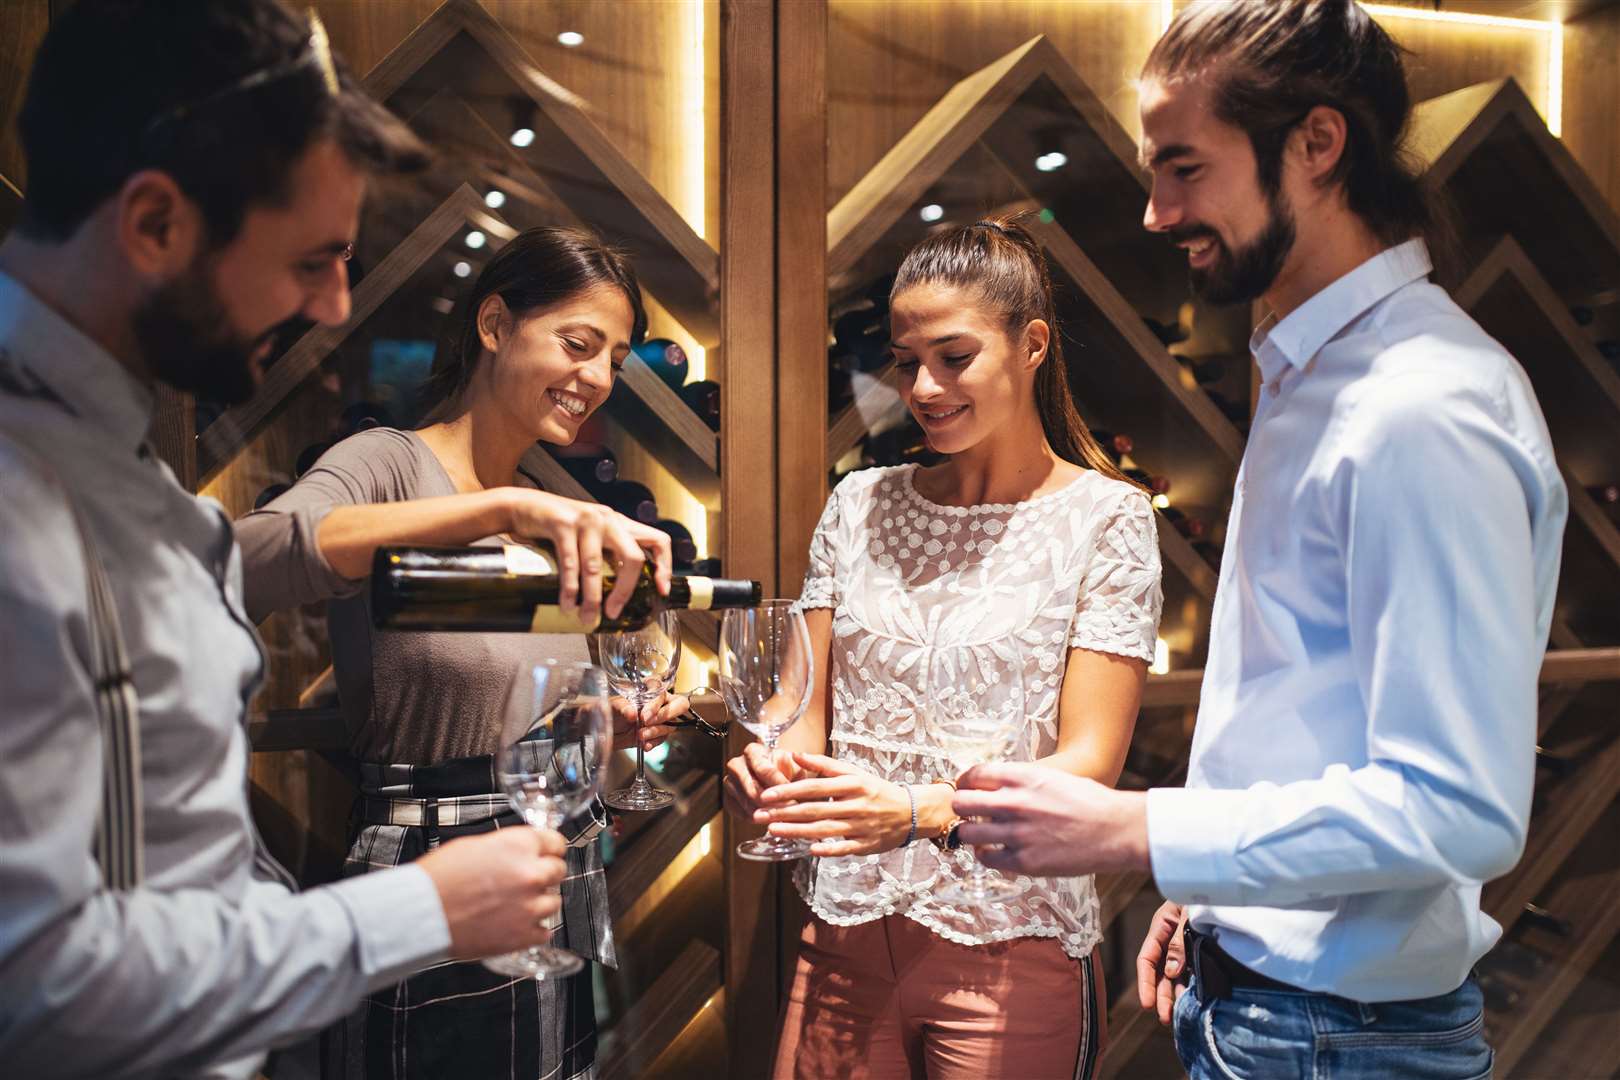 The shared experience of tasting wine is an integral part of the process.